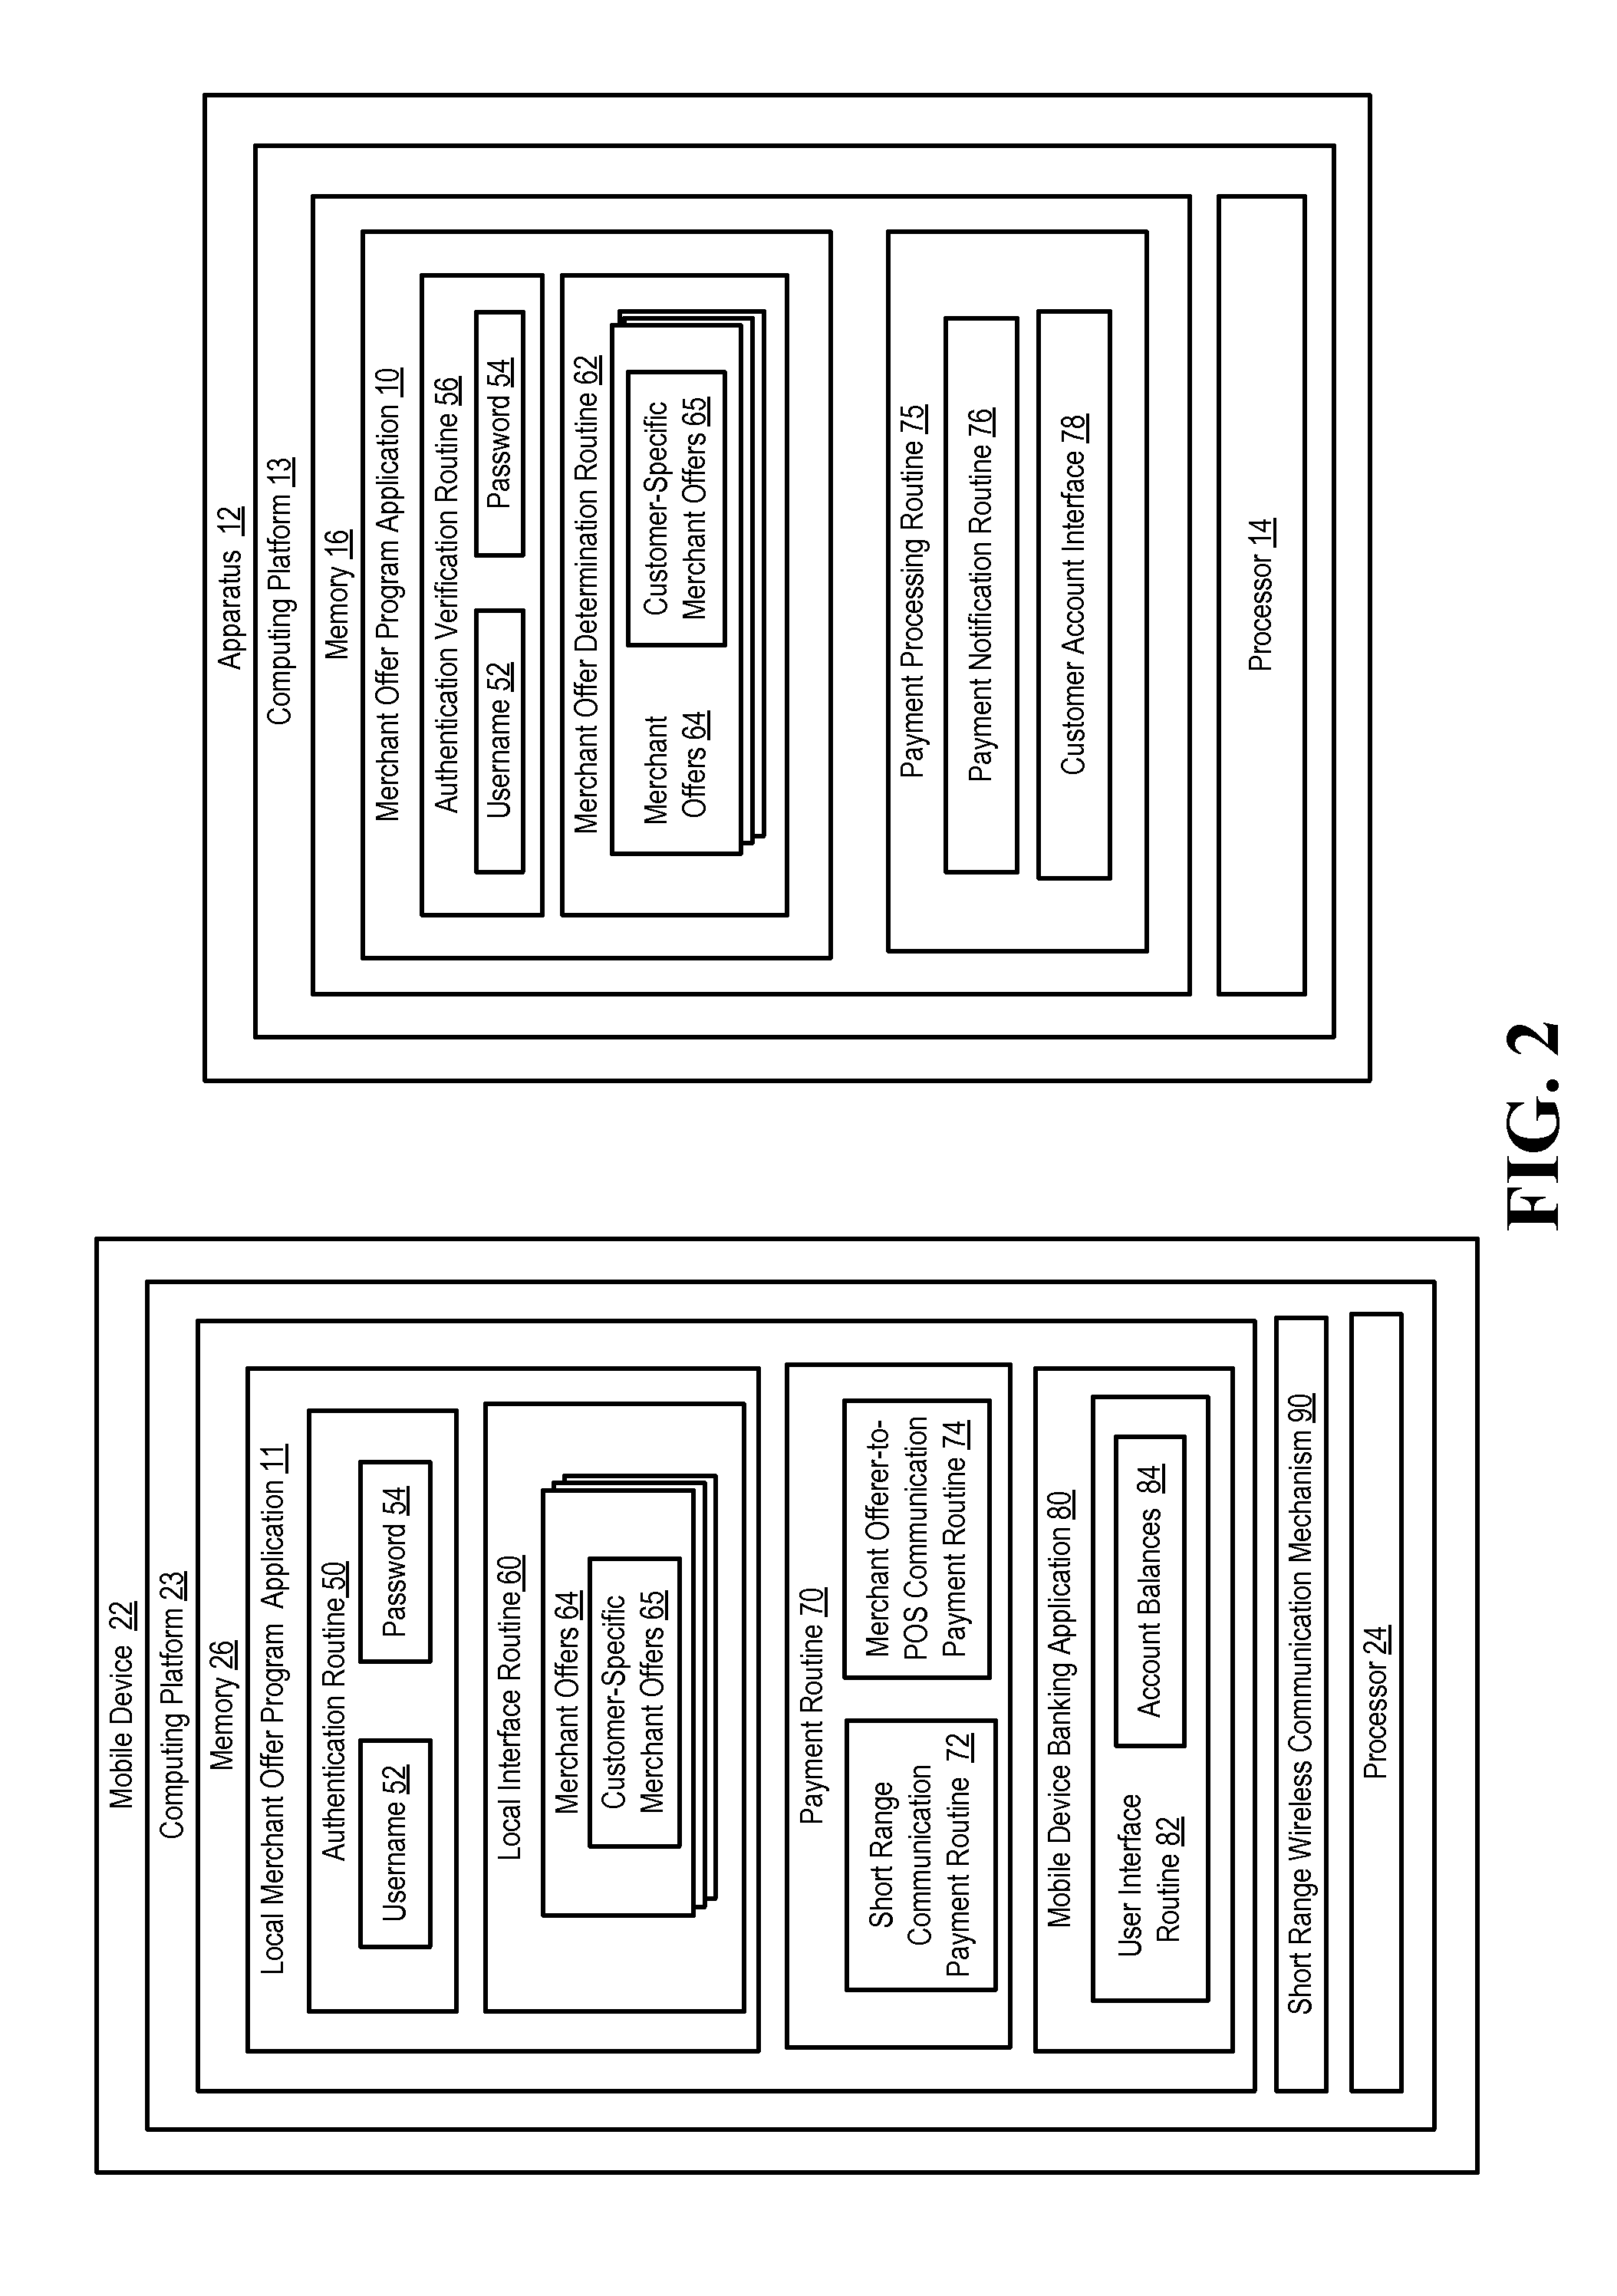 Mobile payment device for conducting transactions associated with a merchant offer program